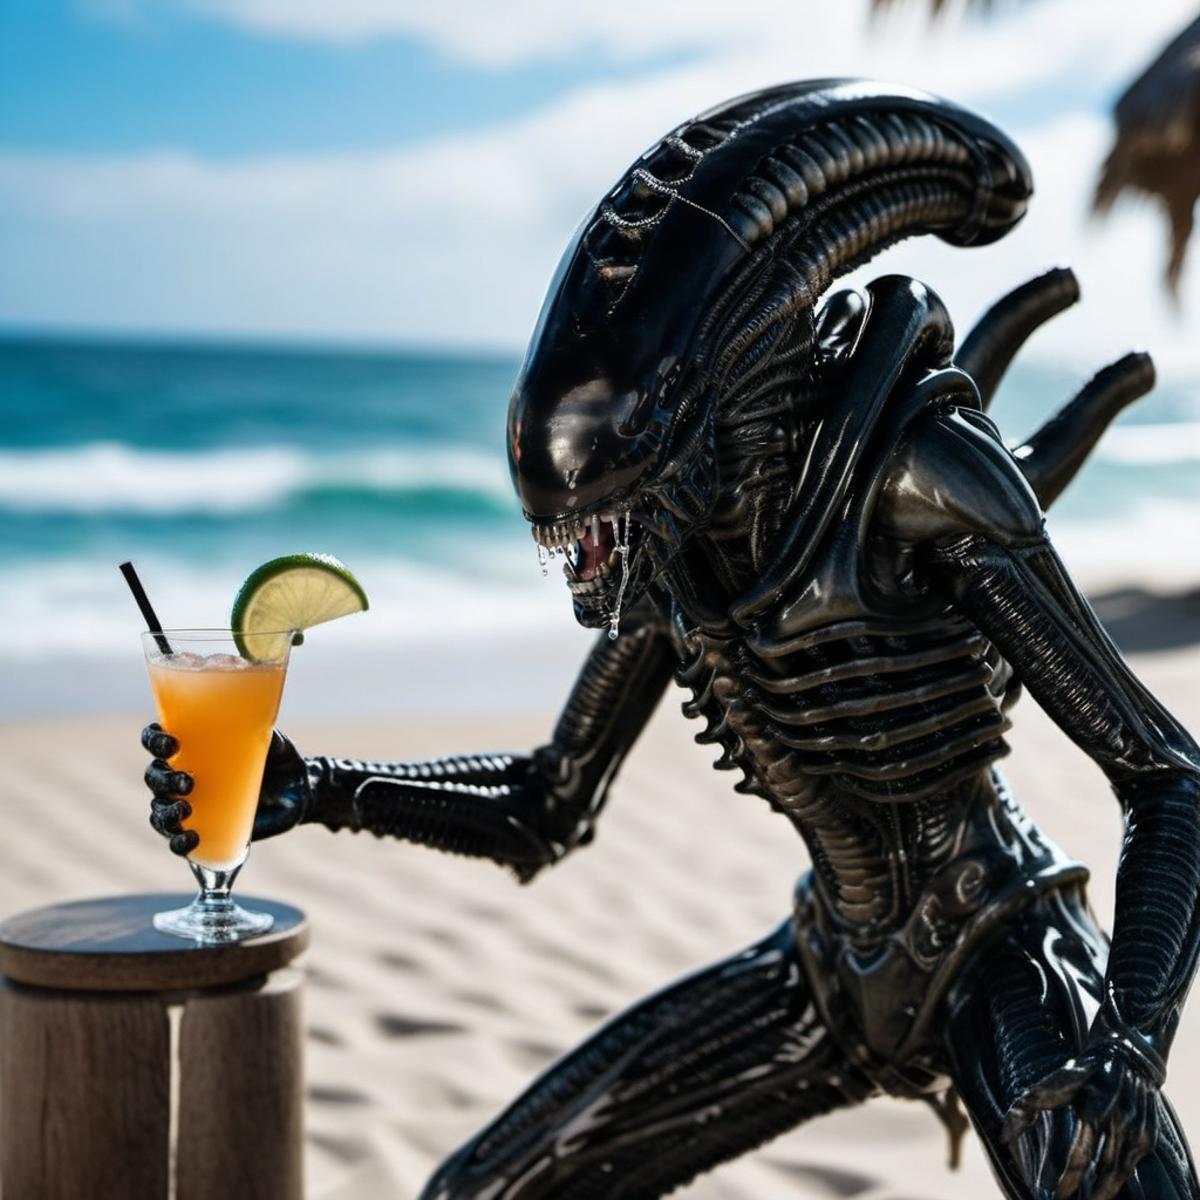 Alien statue holding a cocktail on a beach